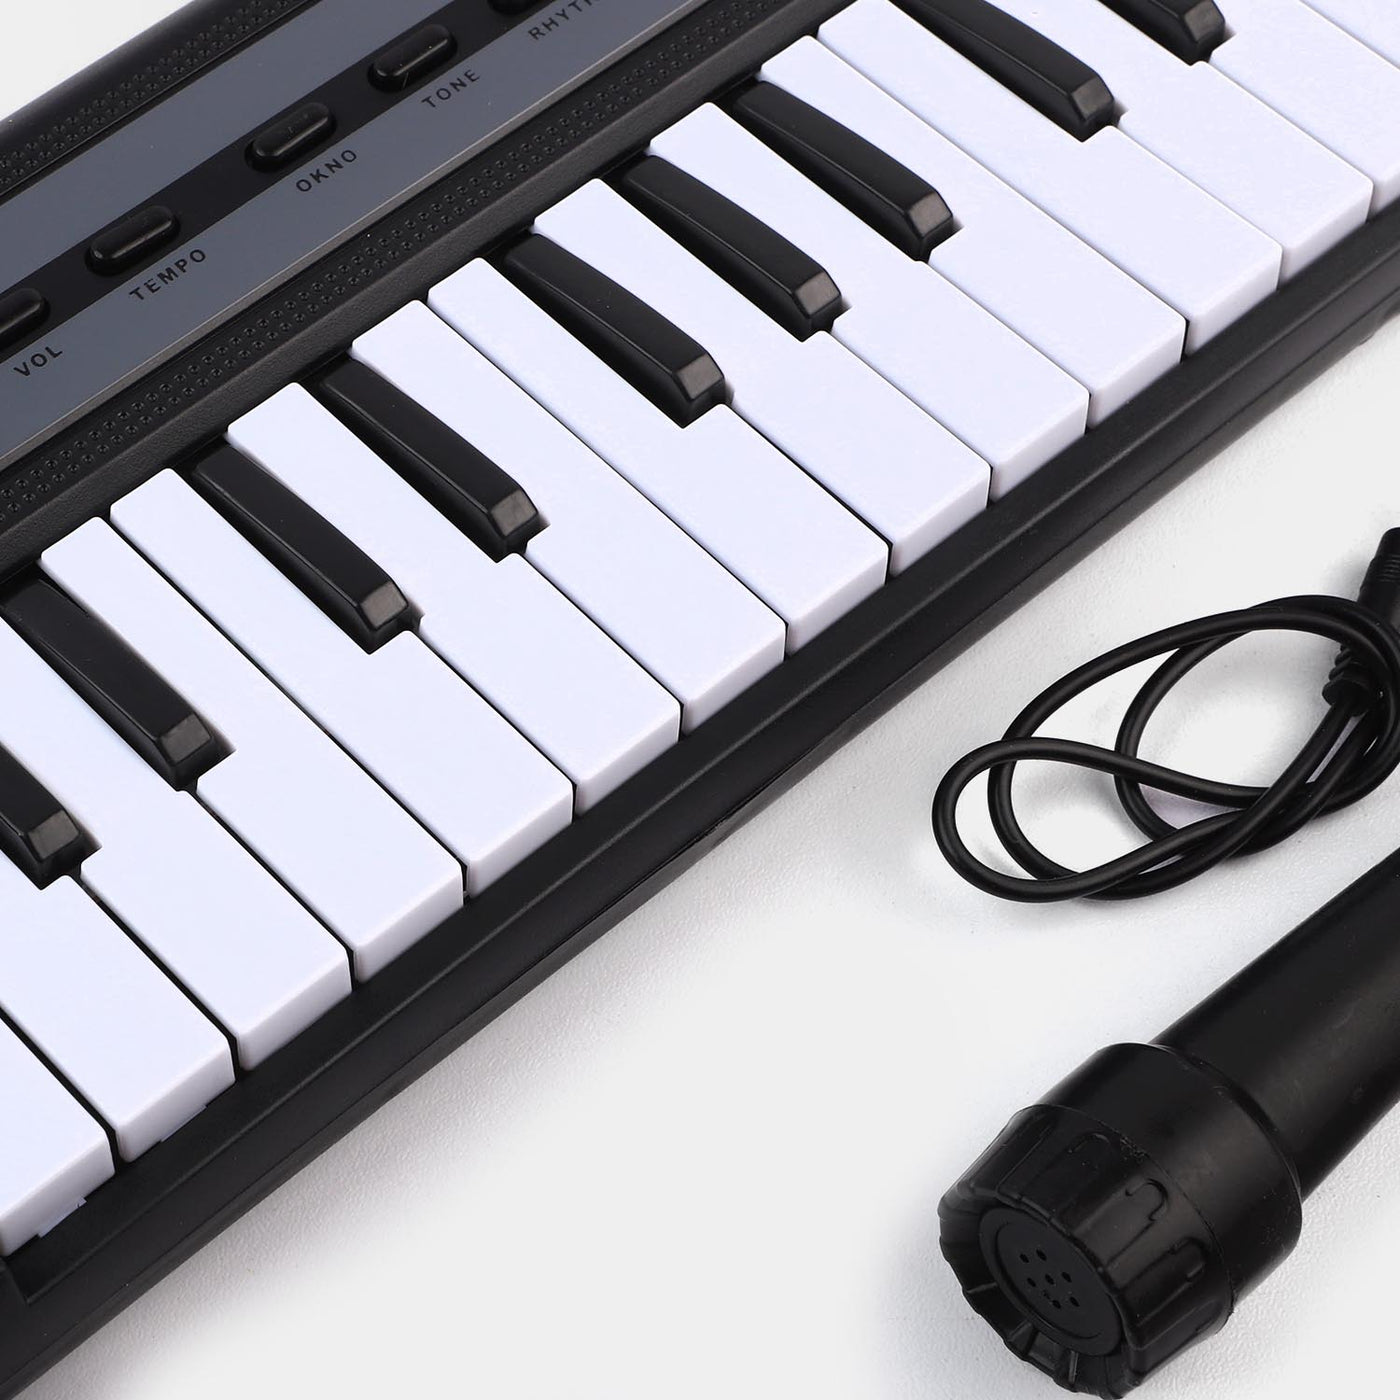 ELECTRIC KEYBOARD PIANO FOR KIDS